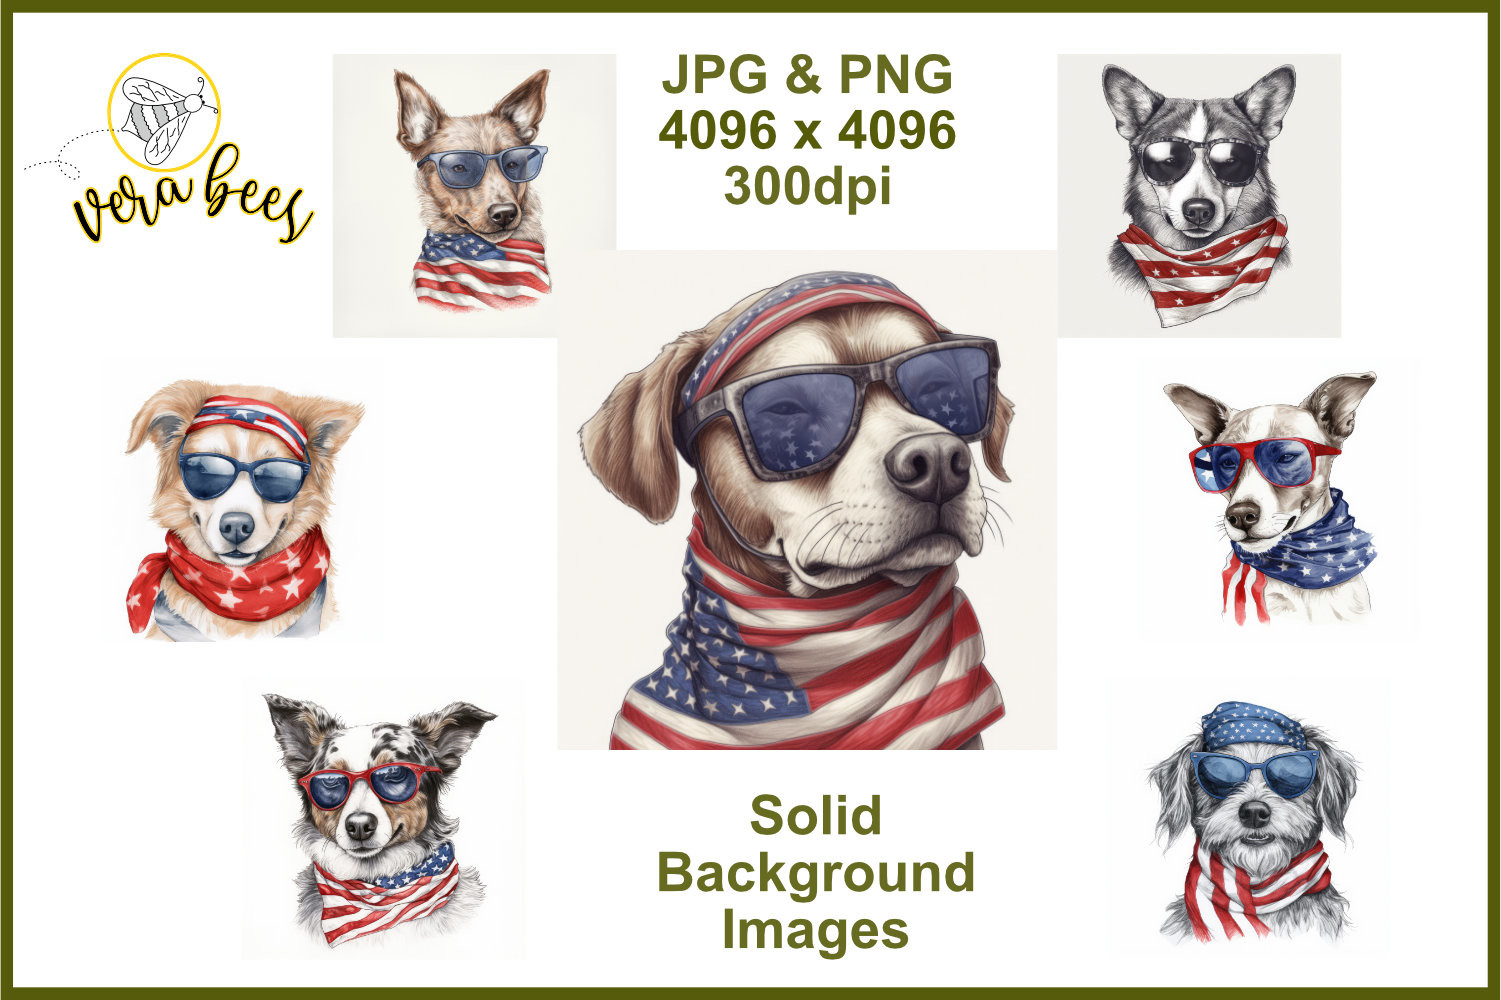 Patriotic Dog Printable Images Jpg & Png Graphic by Vera Bees Svgs ...